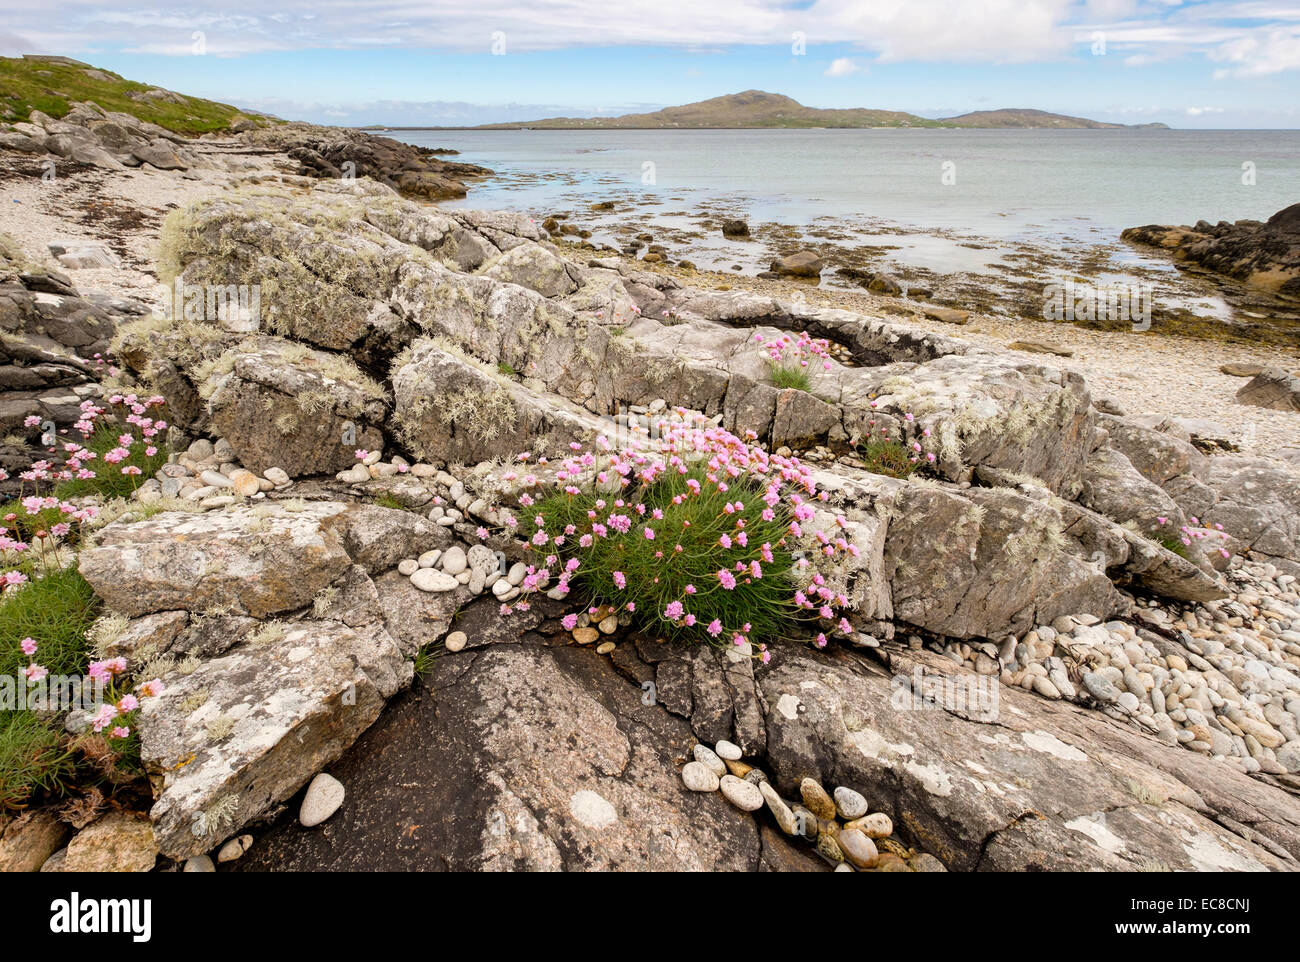 Thrift or Sea Pink flowers (Armeria maritima) growing amongst rocks on beach with view to Eriskay. South Uist Hebrides Scotland Stock Photo